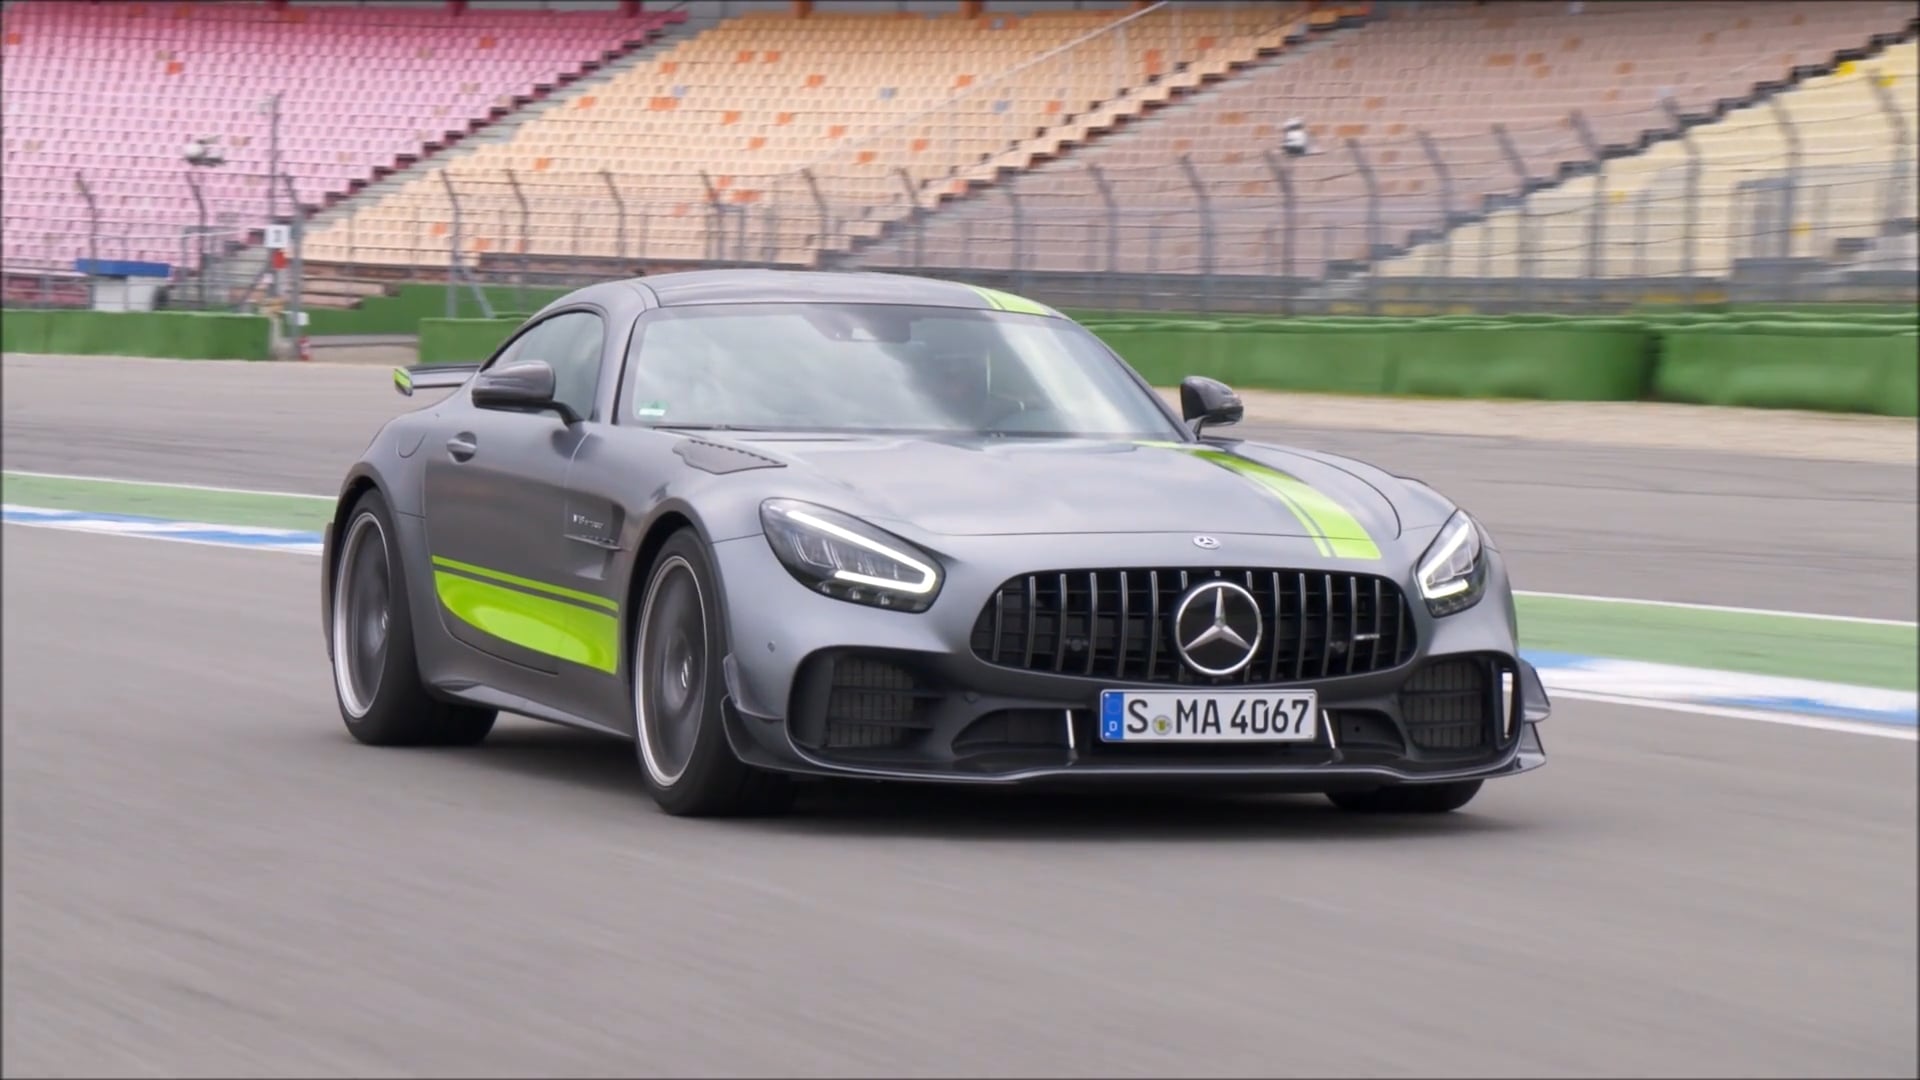 Overview: 2020 Mercedes-AMG GT R Pro